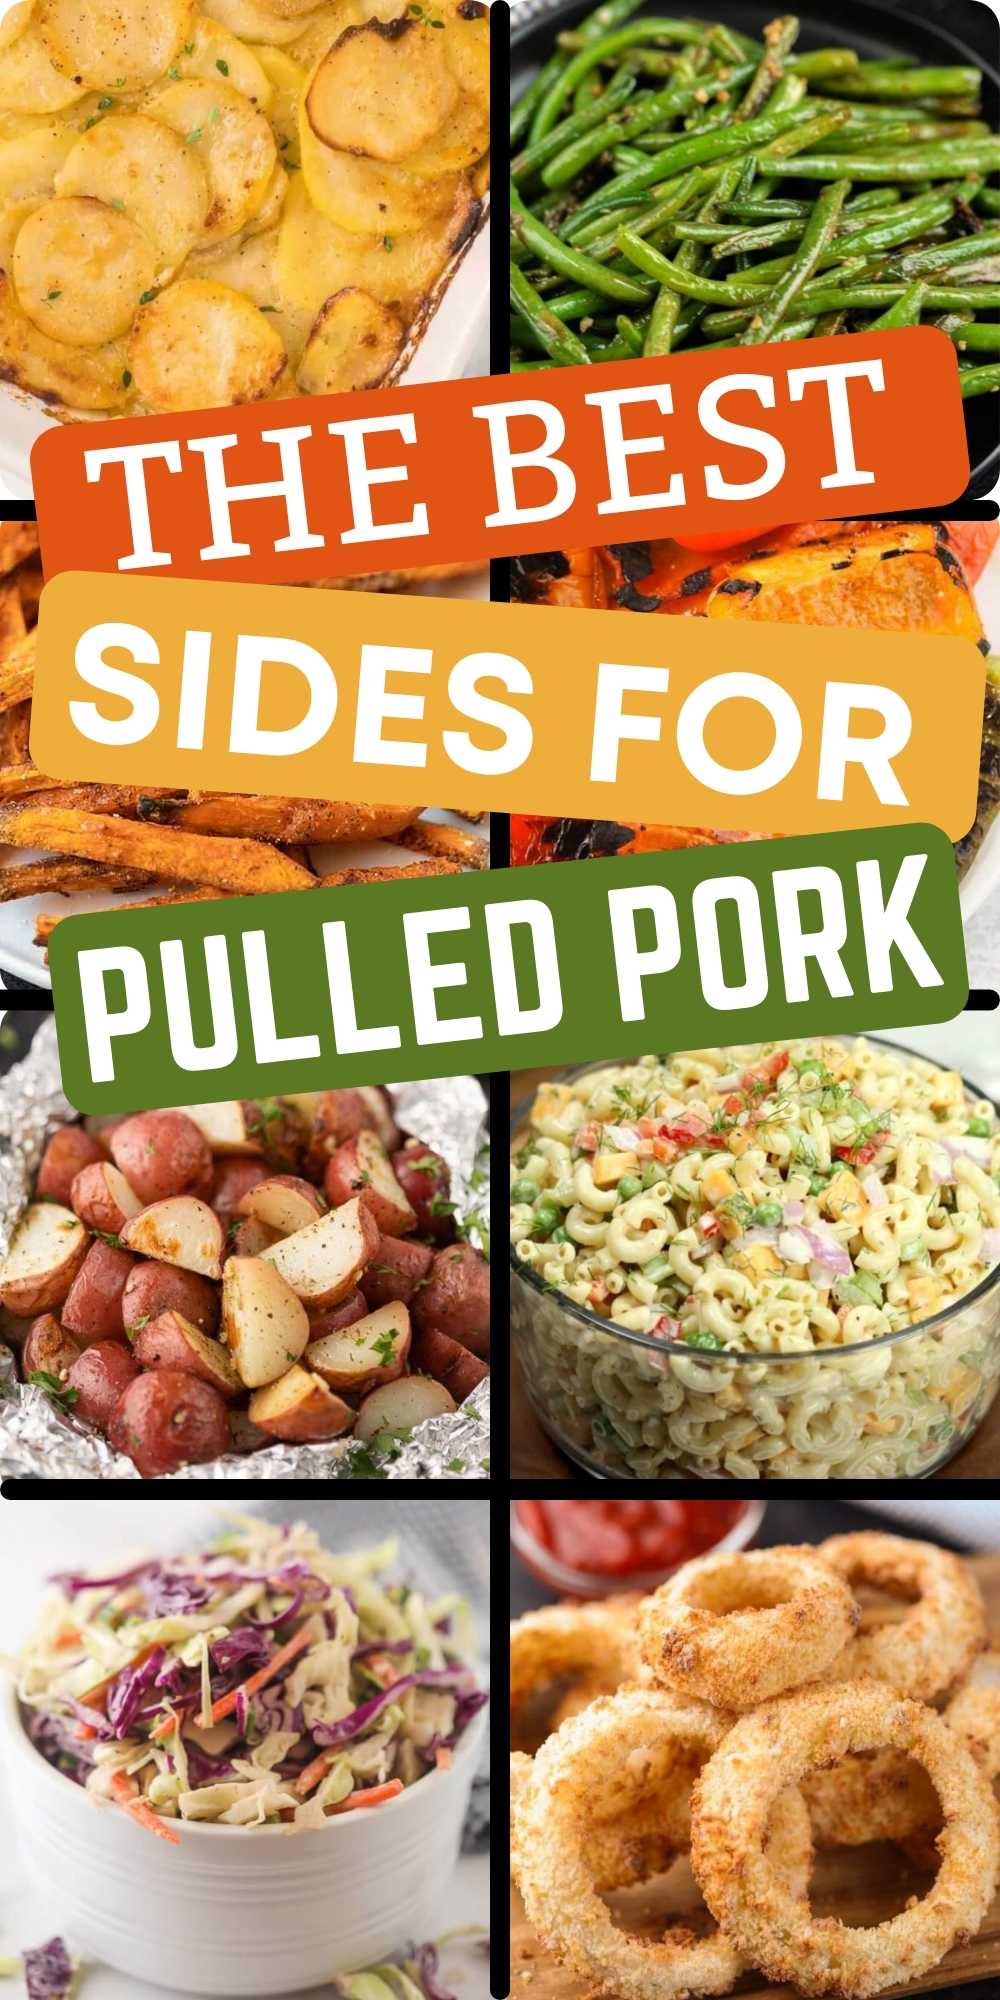 The best pulled pork sides that are easy to prepare and delicious. 35 side dishes for pulled pork that can feed a crowd. Check out what goes with pulled pork and serve the best side dishes for your next BBQ or cookout! #eatingonadime #sidedishes #pulledpork #thebestsides 
